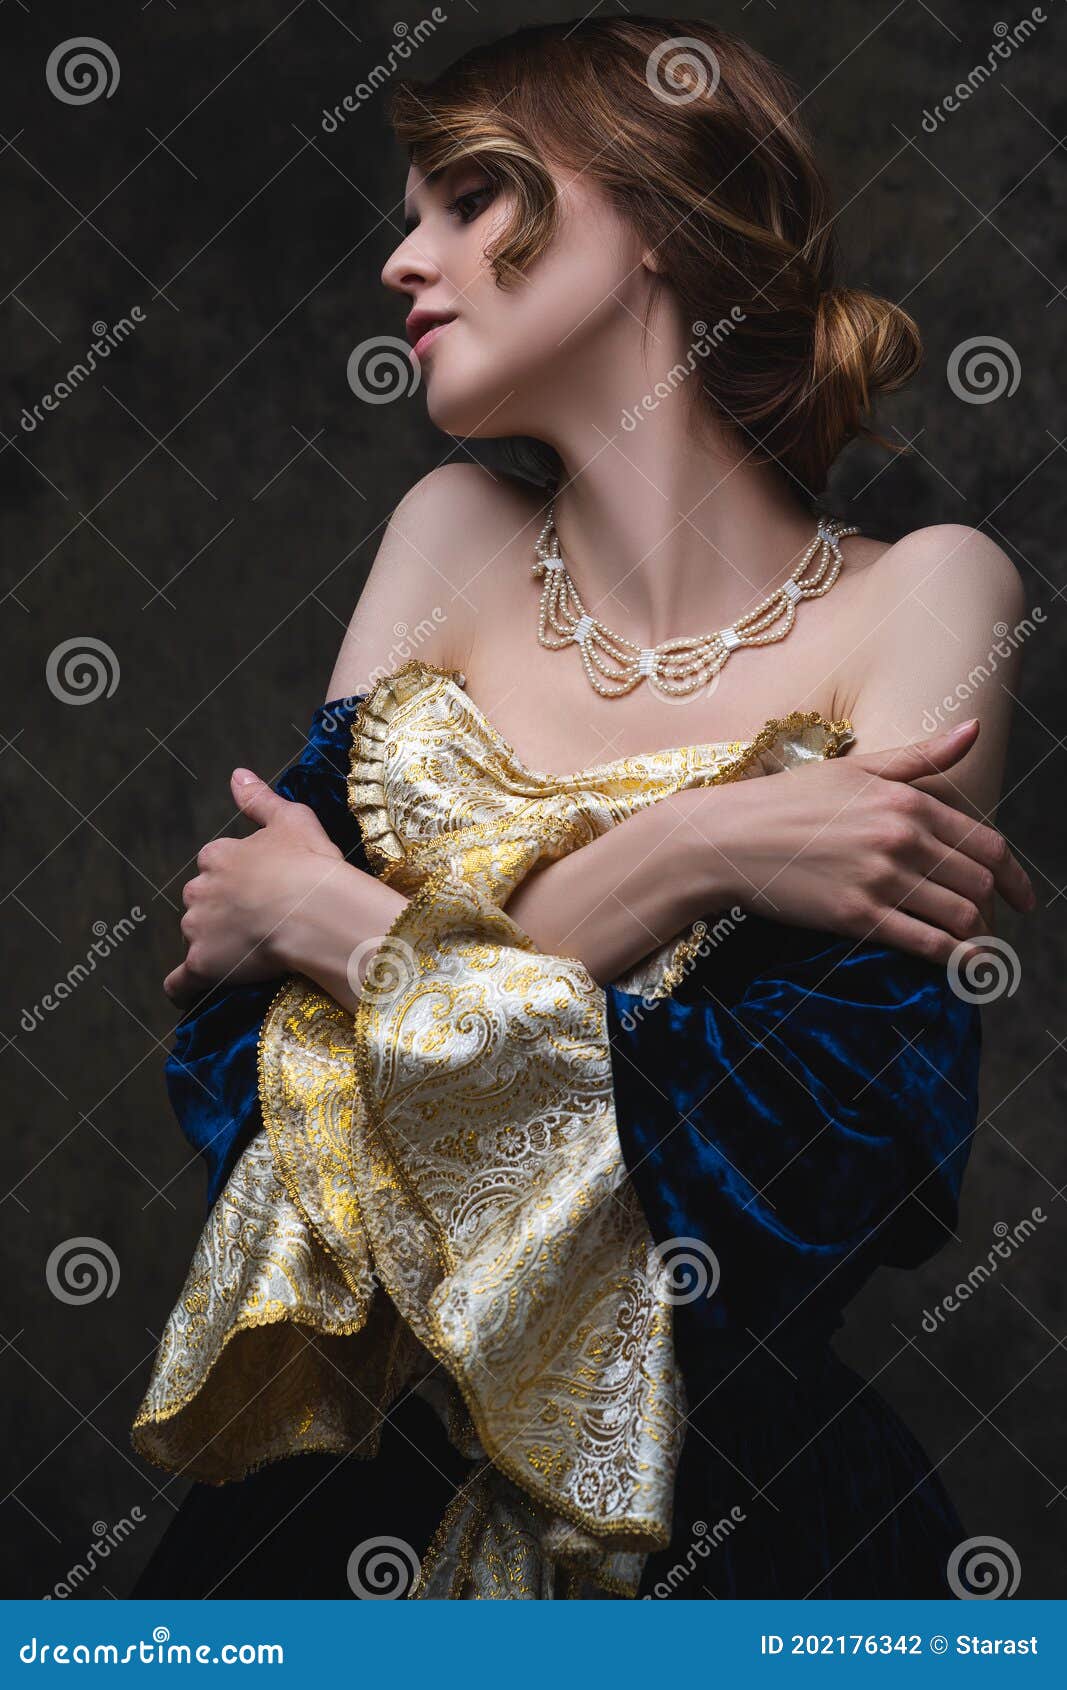 beautiful sexy woman in renaissance dress on abstract dark background